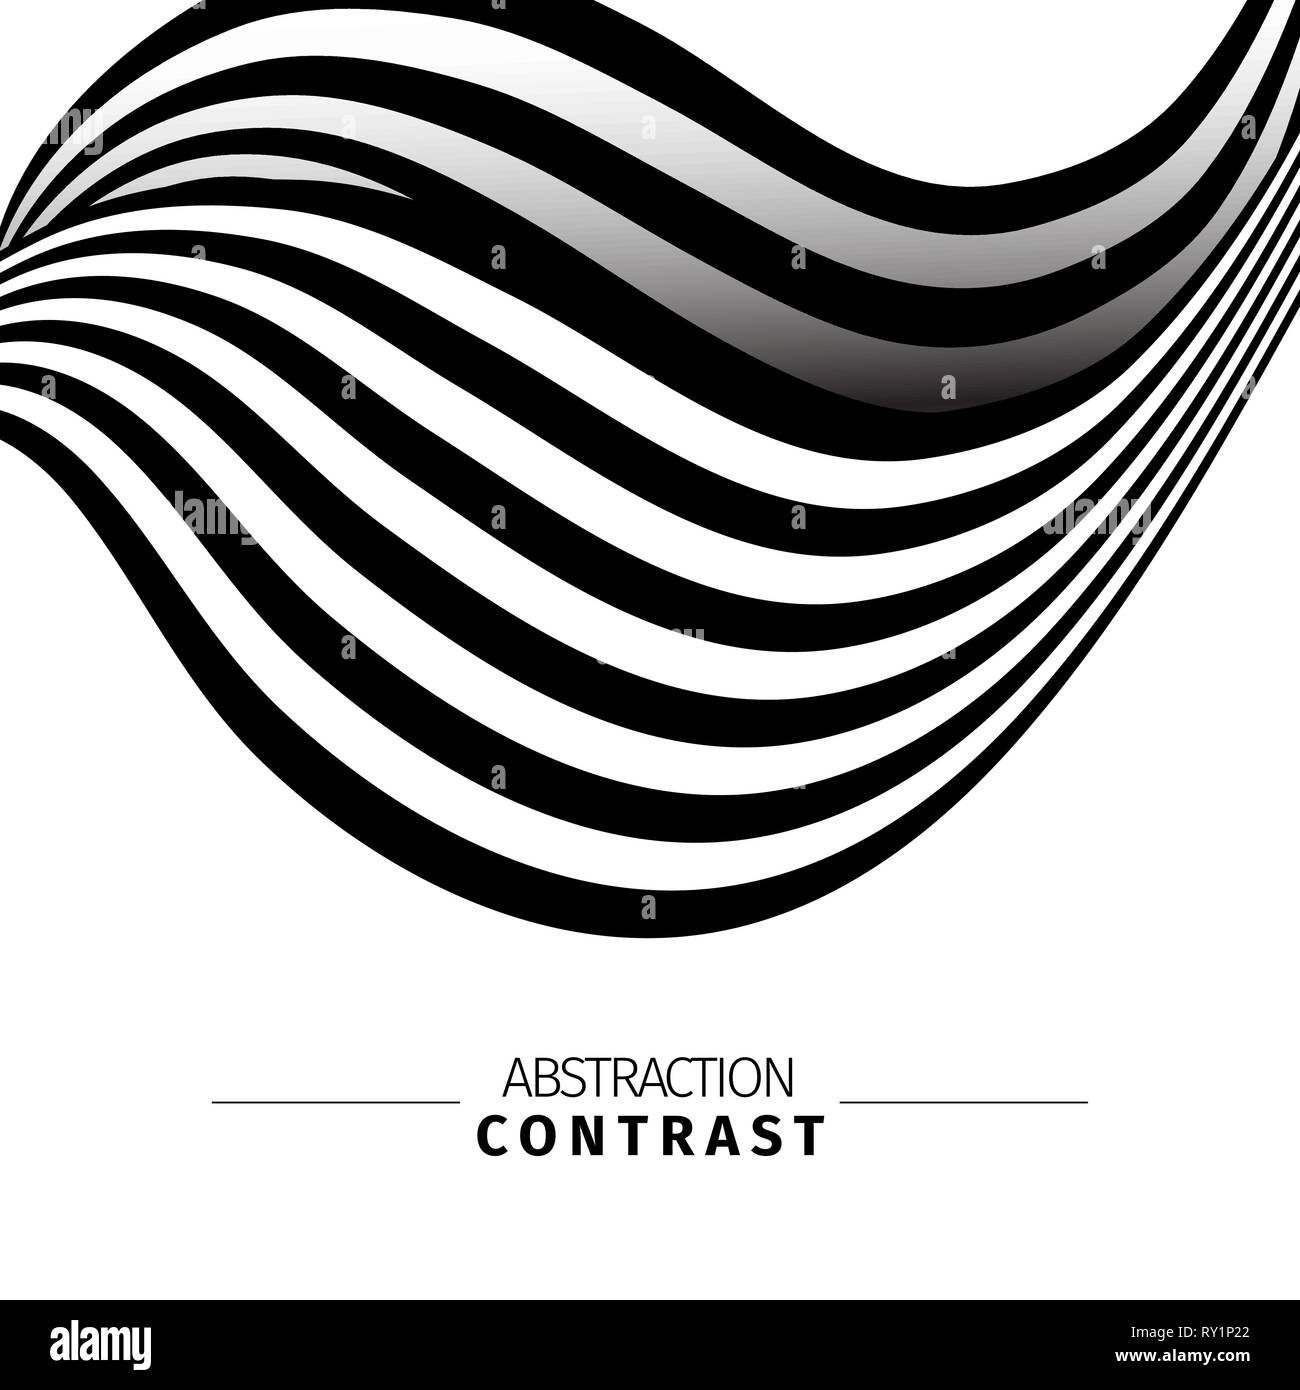 Abstract black and white 3d waves color background with text space. Wavy backdrop composition. Monochrome wave-like drawing. Contrast stripes vector illustration. Minimalistic poster concept Stock Vector